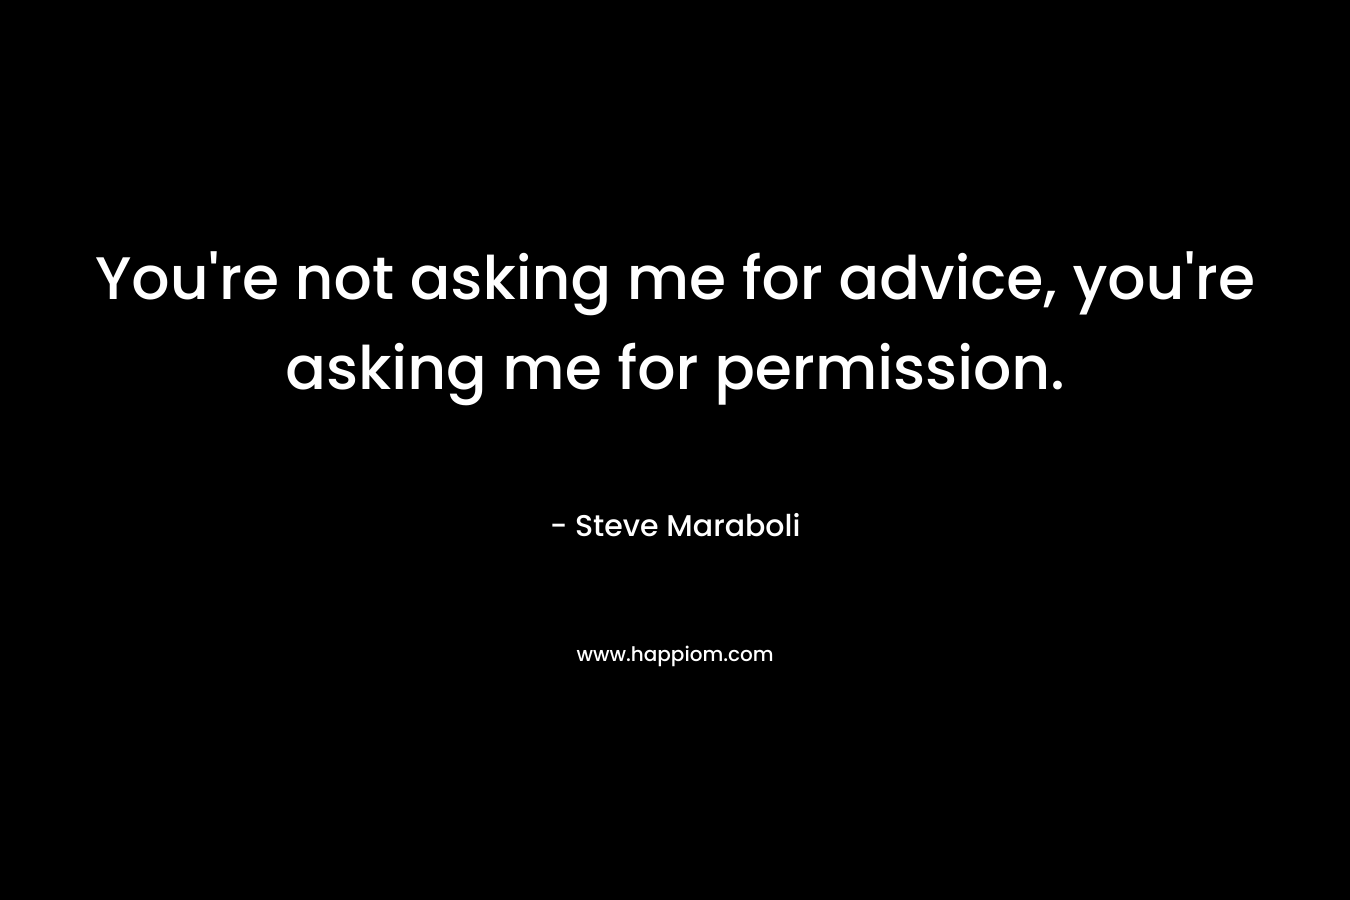 You're not asking me for advice, you're asking me for permission.